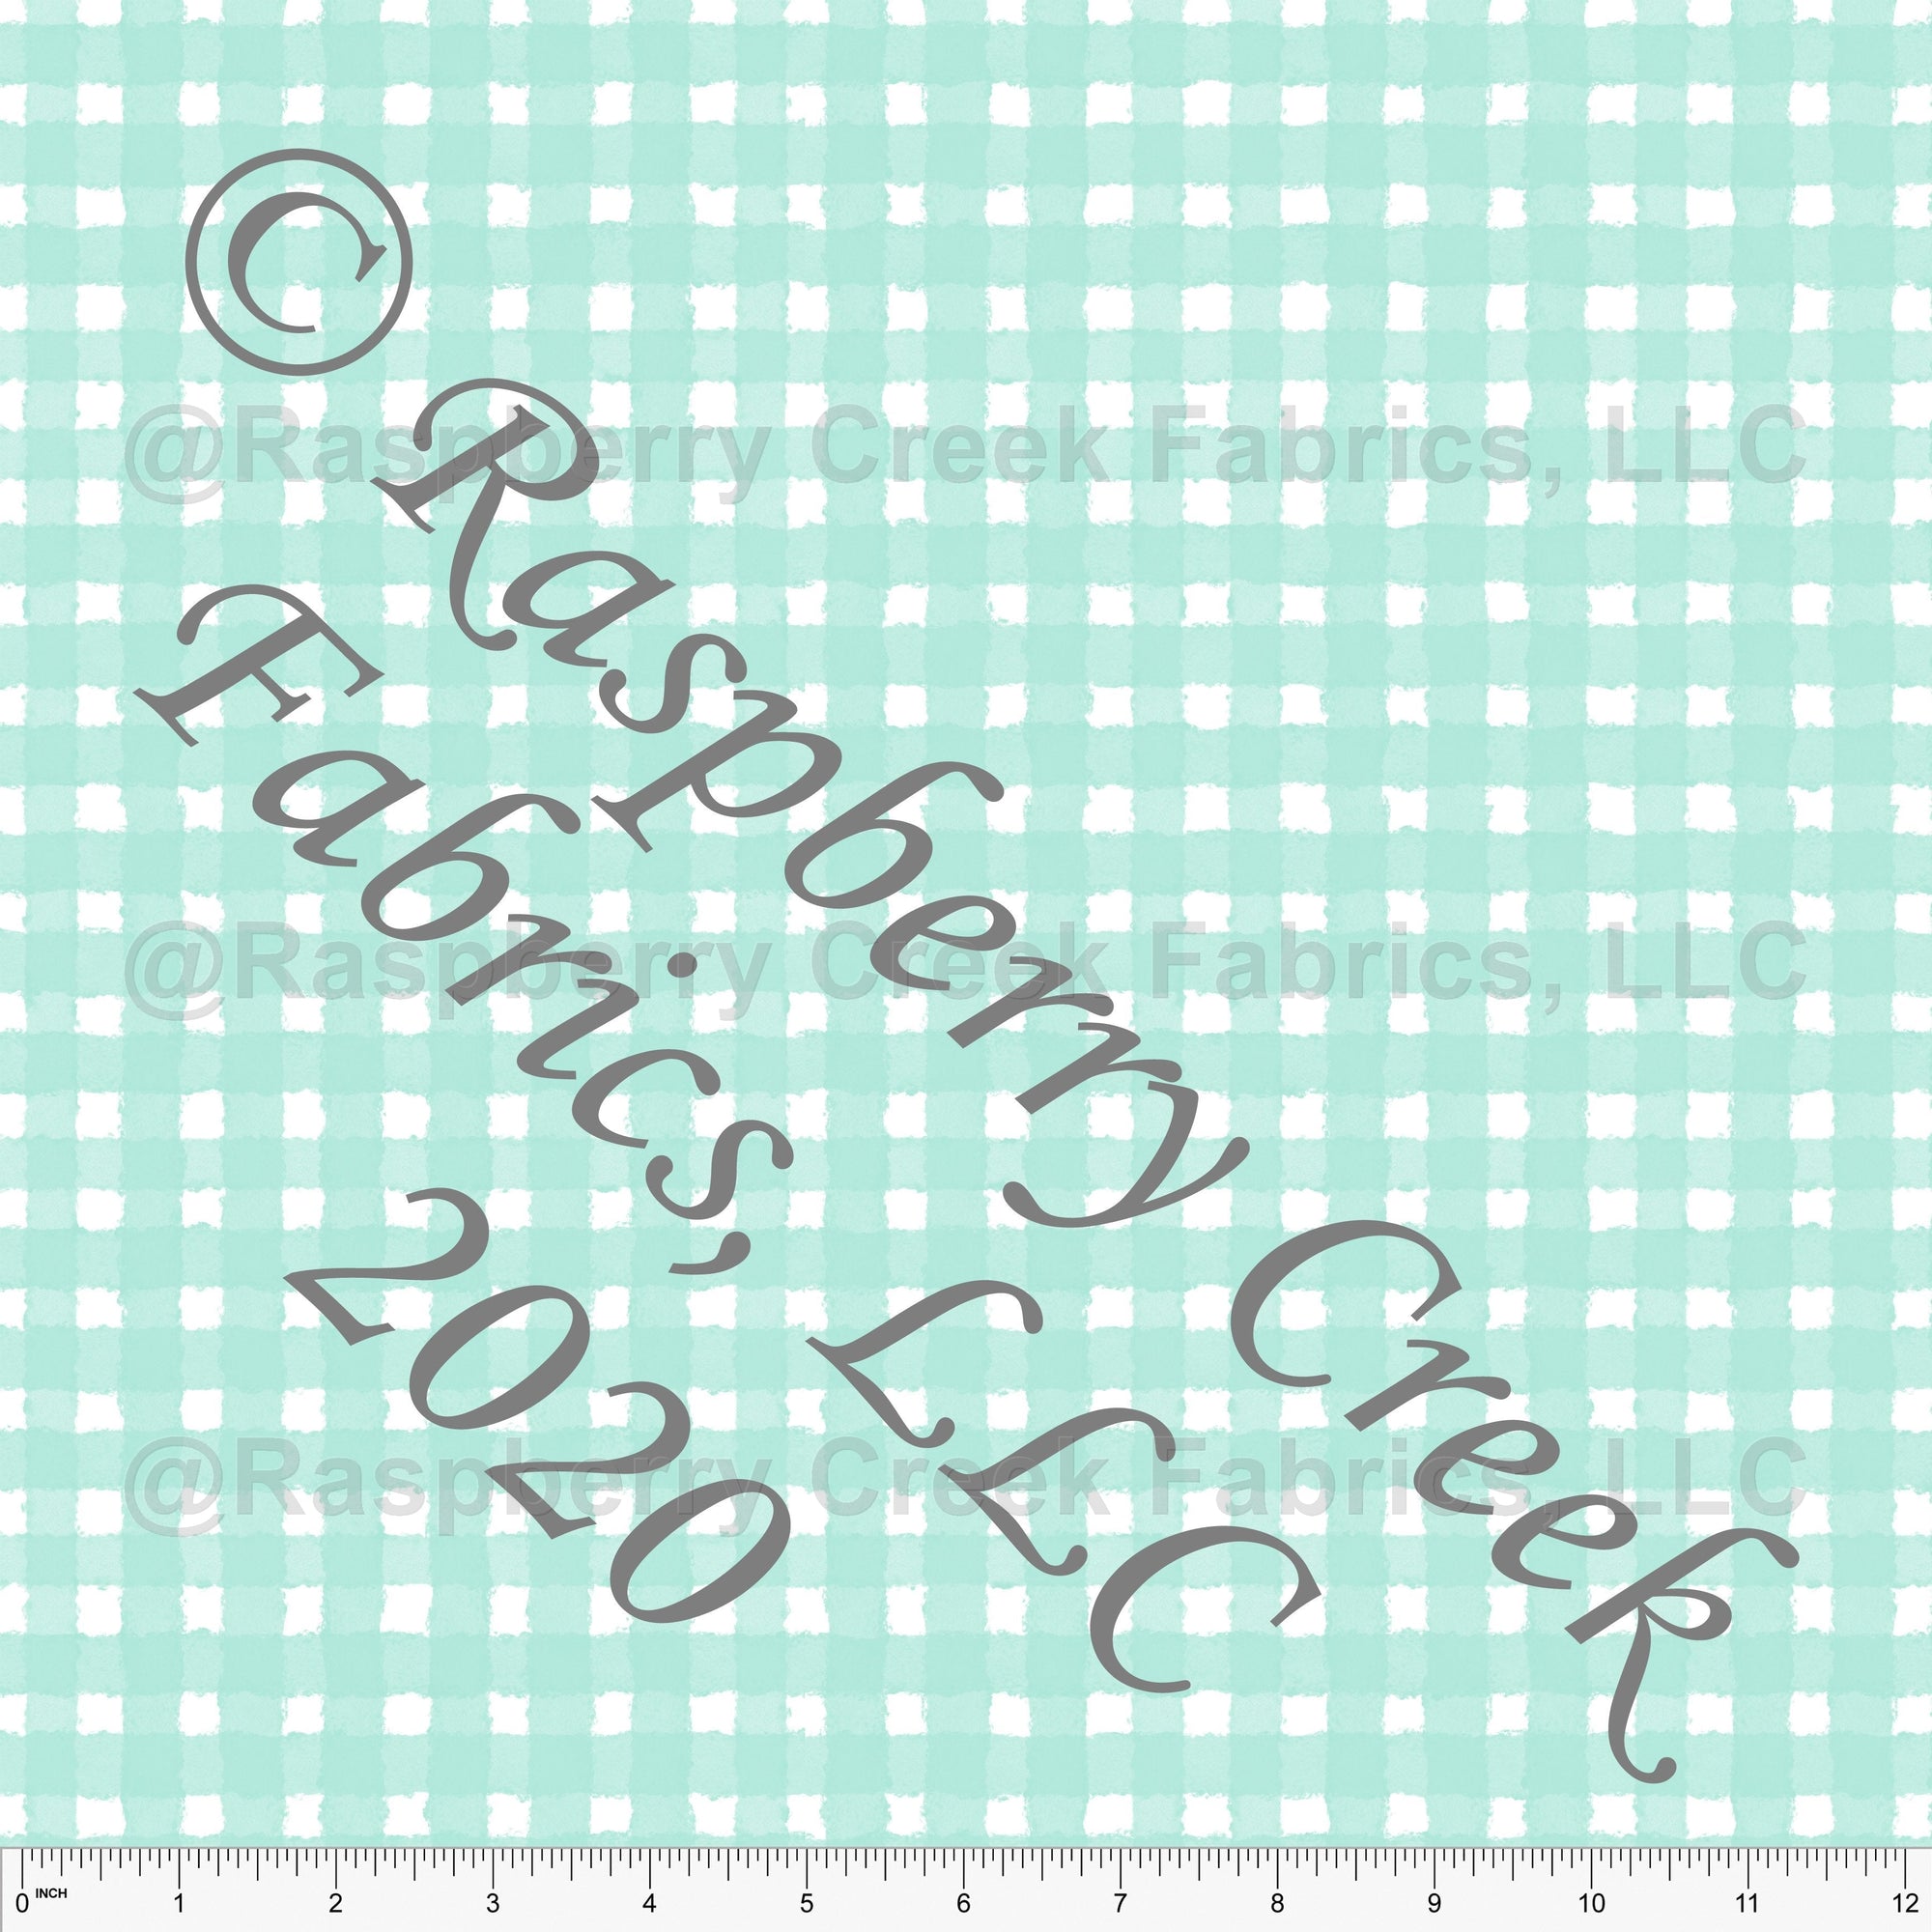 Mint and White Painted Check Gingham, By Bri Powell for Club Fabrics Fabric, Raspberry Creek Fabrics, watermarked